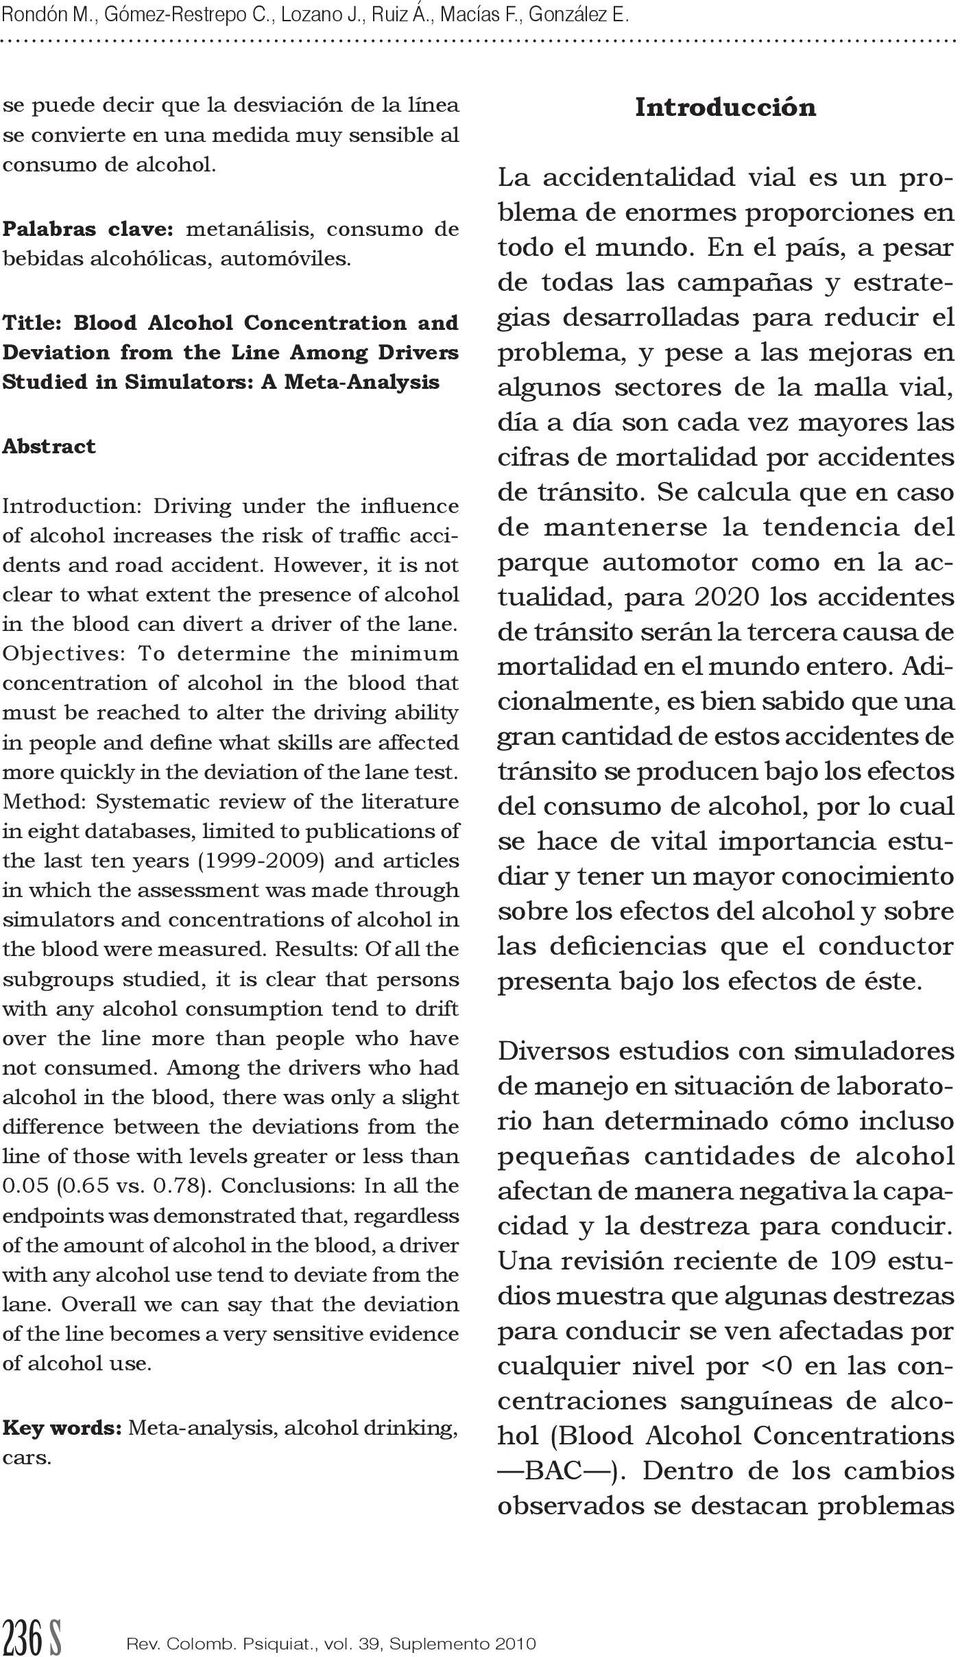 Title: Blood Alcohol Concentration and Deviation from the Line Among Drivers Studied in Simulators: A Meta-Analysis Abstract Introduction: Driving under the influence of alcohol increases the risk of